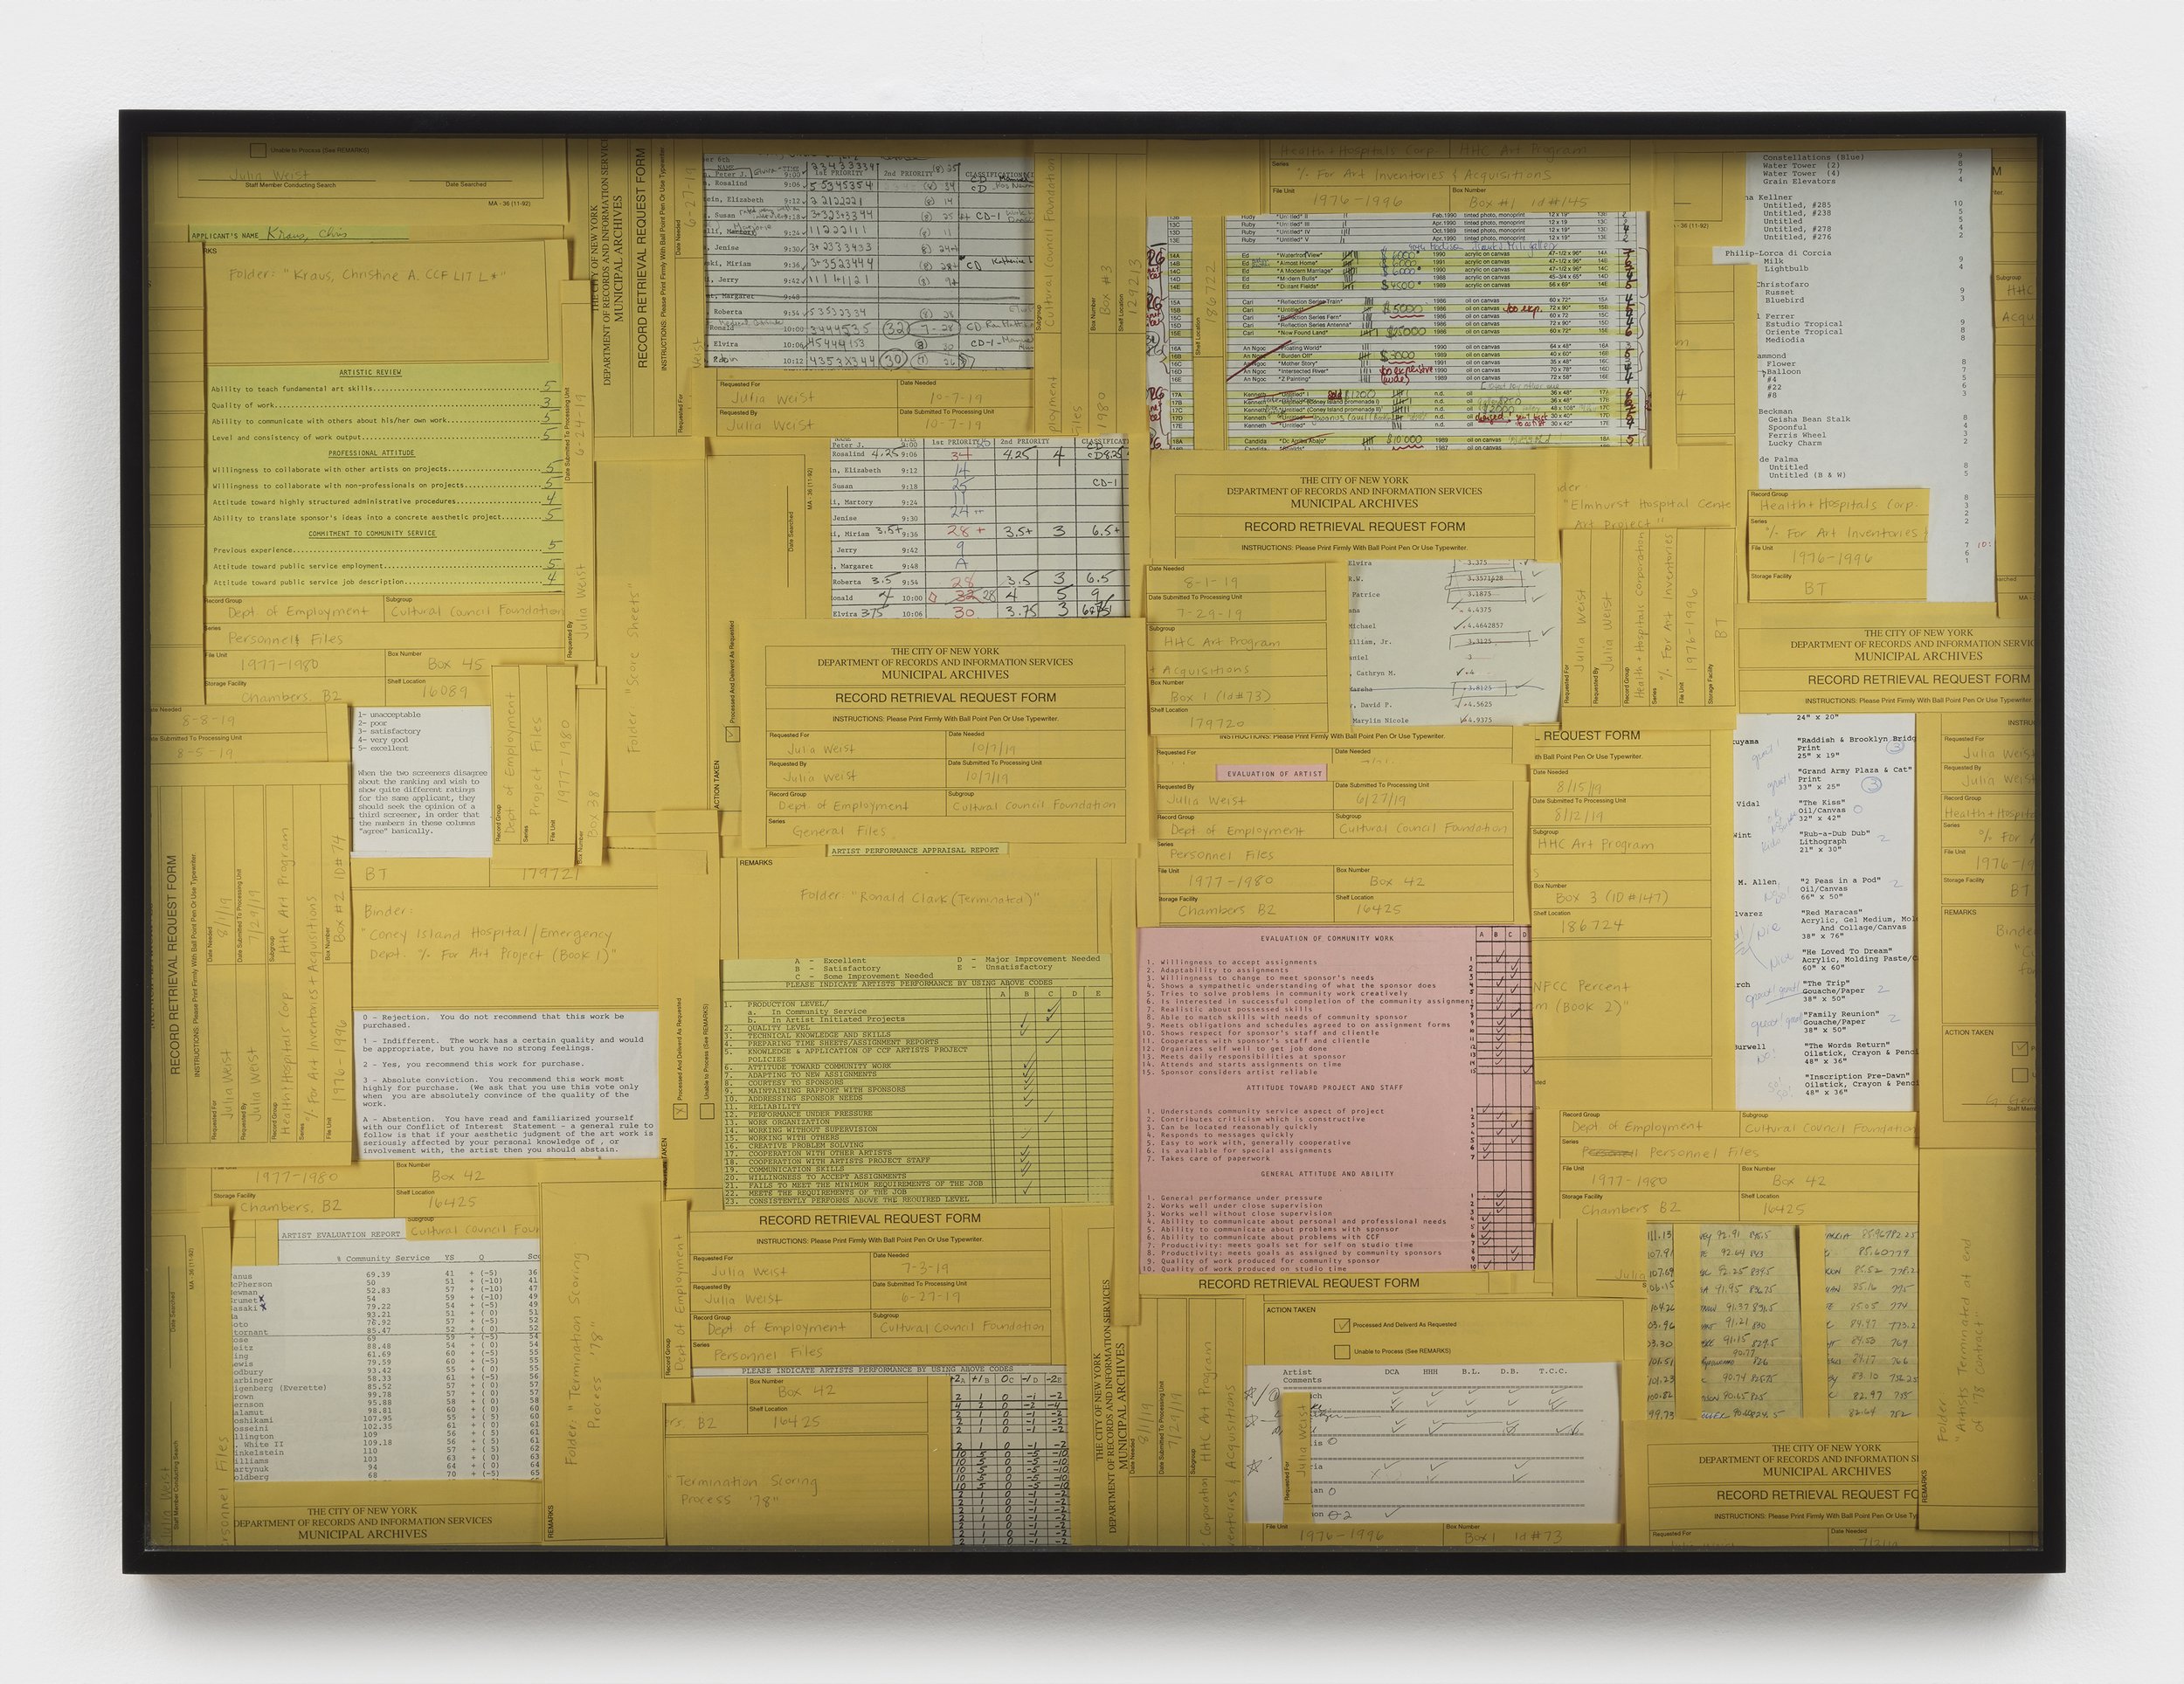   Rubrics (from the series “Public Record”) , 2020&nbsp; Archival pigment print&nbsp; 29 5/8 x 39 3/4 inches (framed)&nbsp;     ABOUT PUBLIC RECORD   